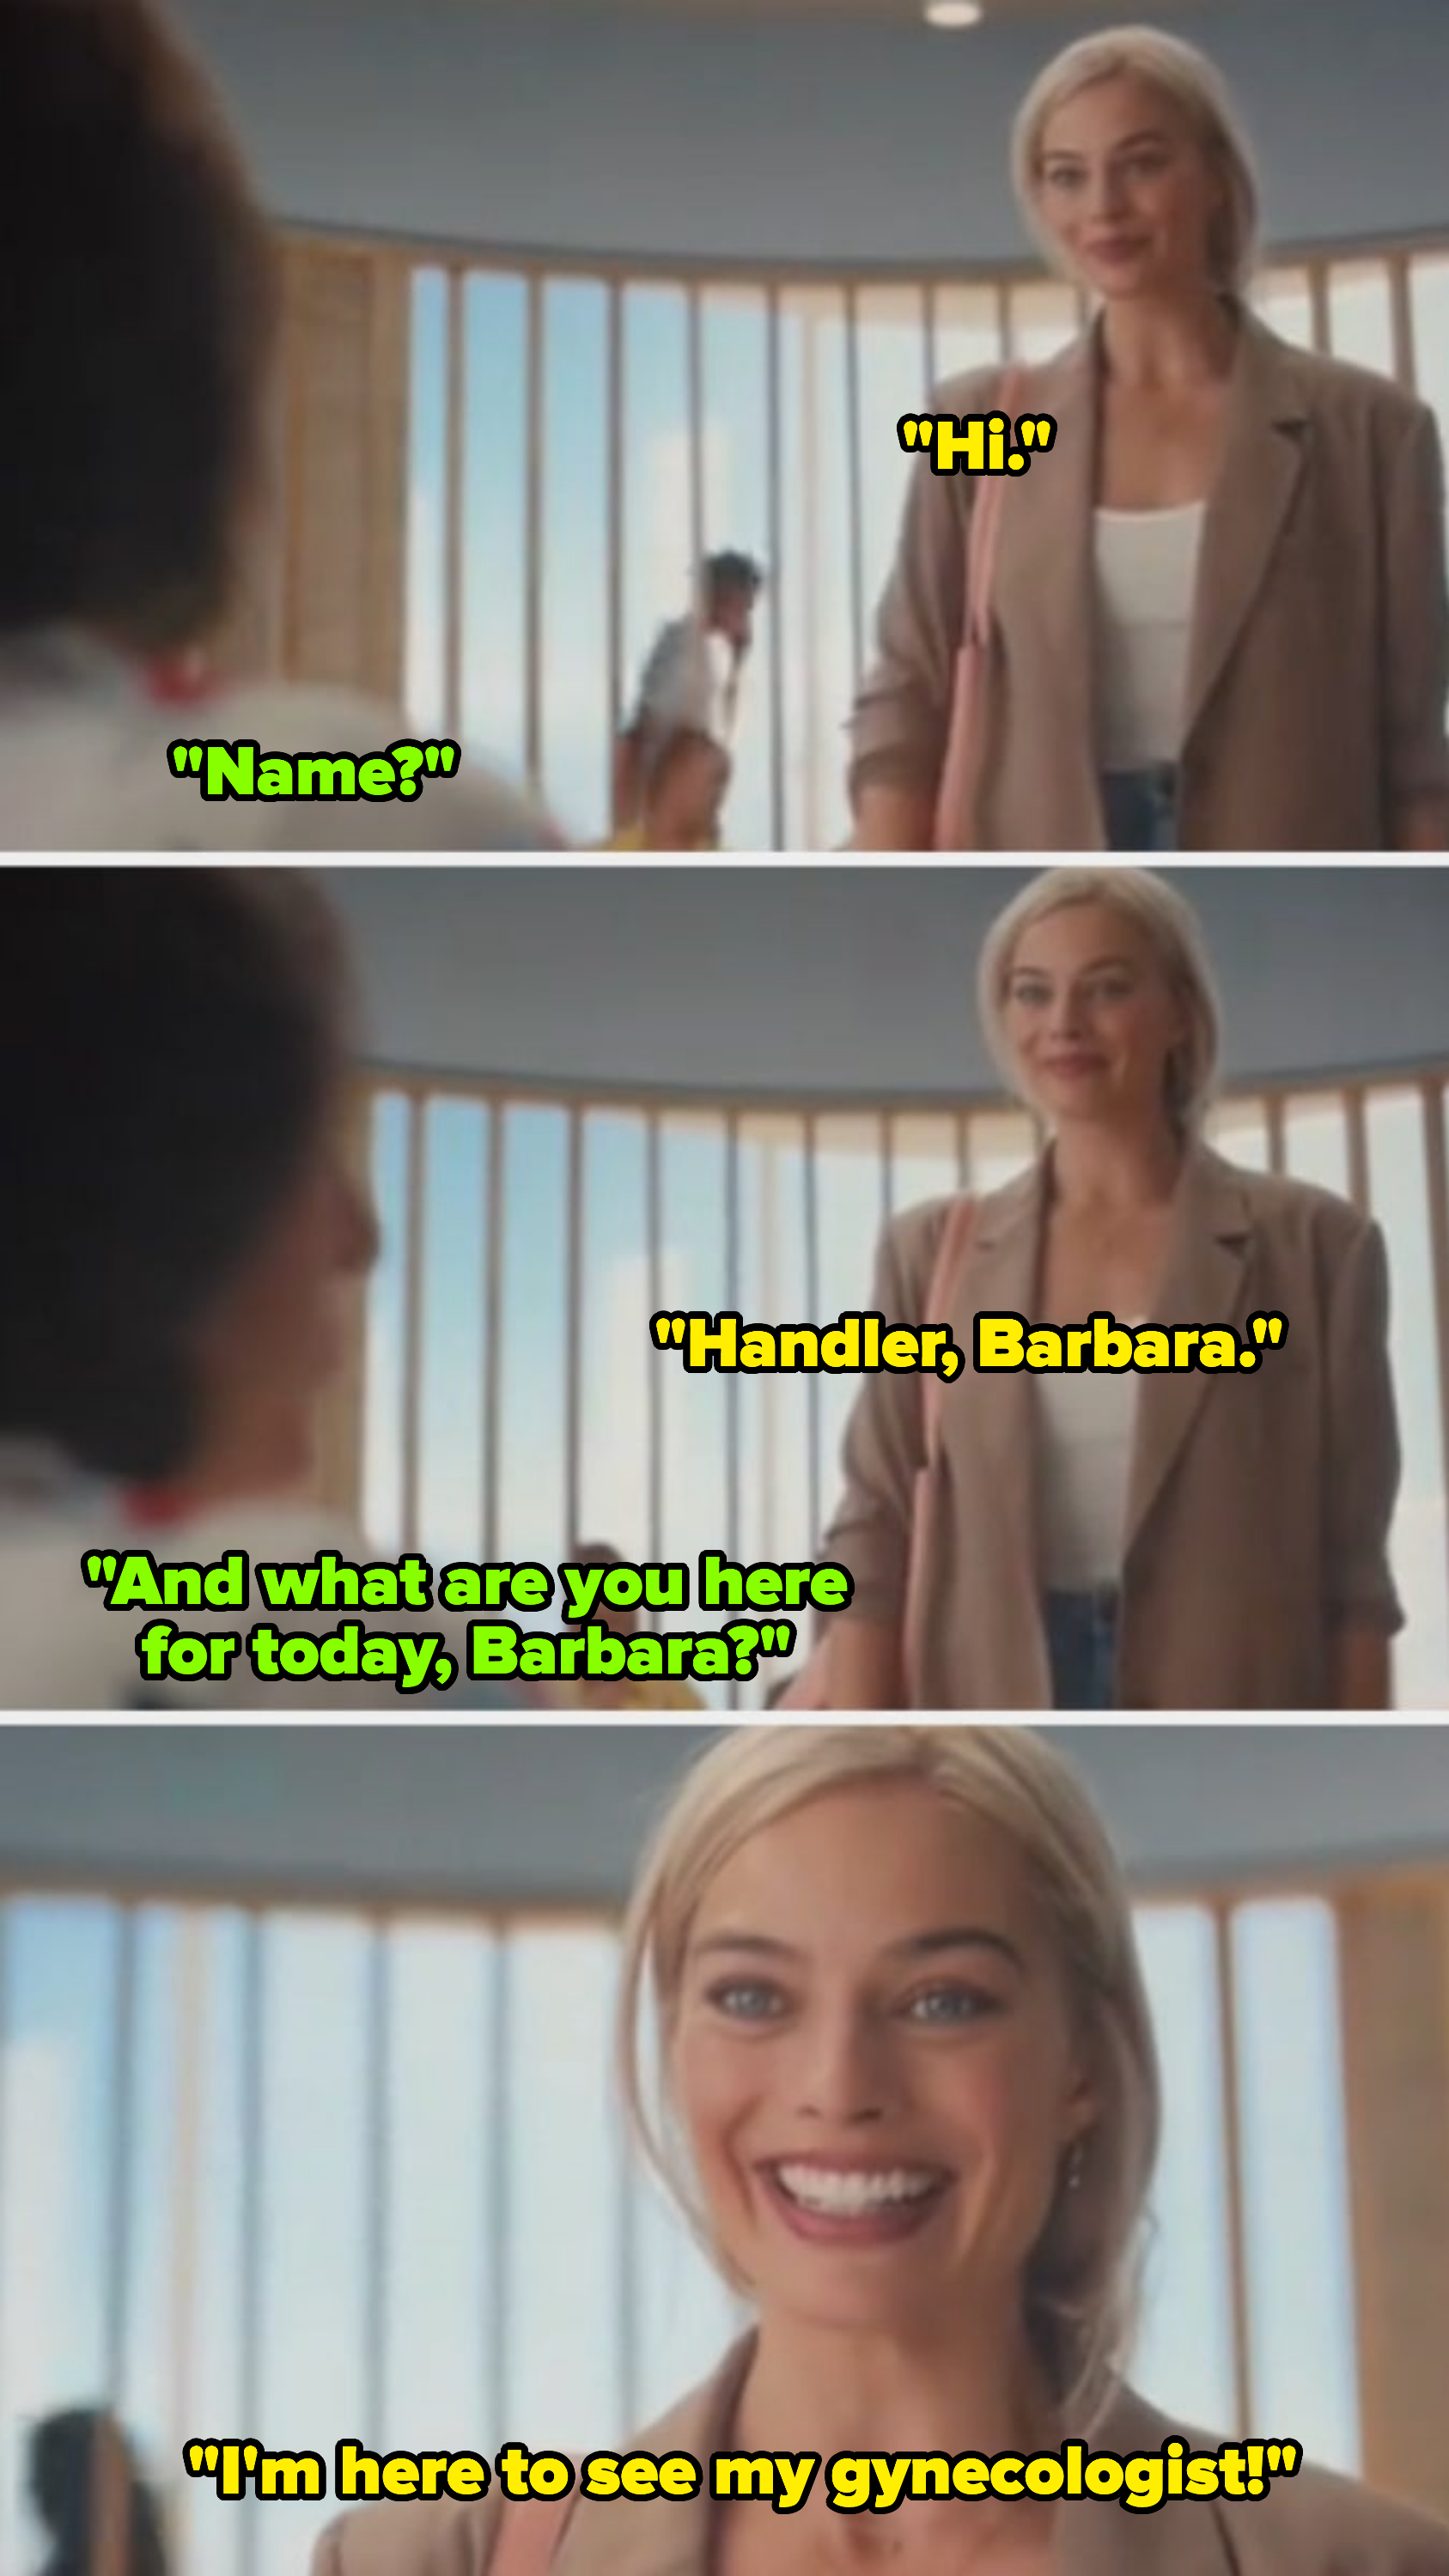 Margot Robbie in &quot;Barbie&quot; saying she&#x27;s there to see her gynecologist